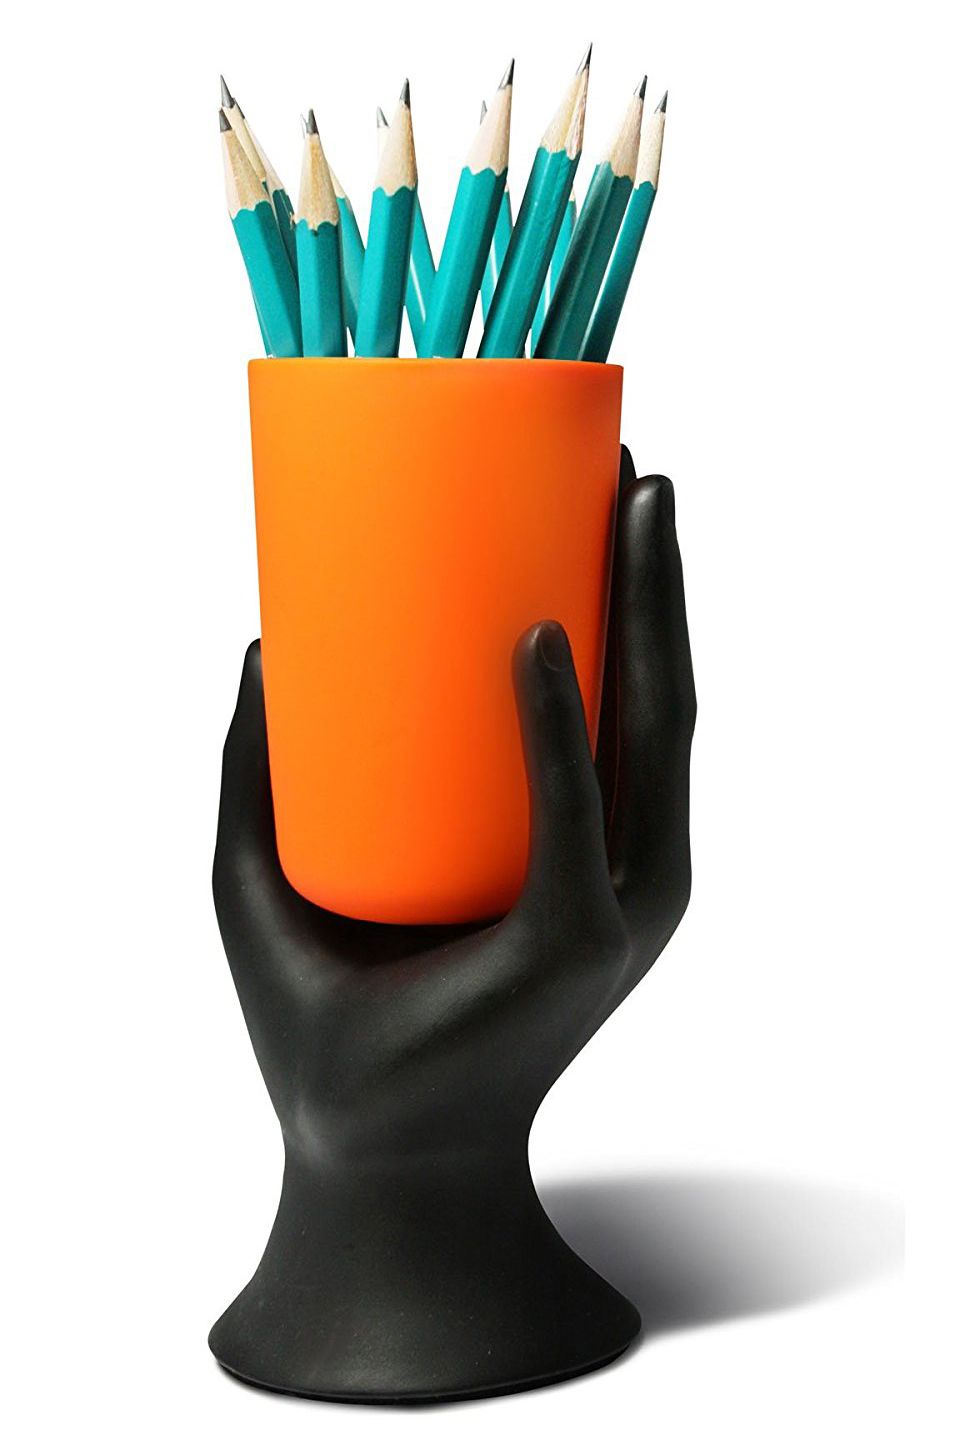 arad hand cup pen pencil holder by lilgift